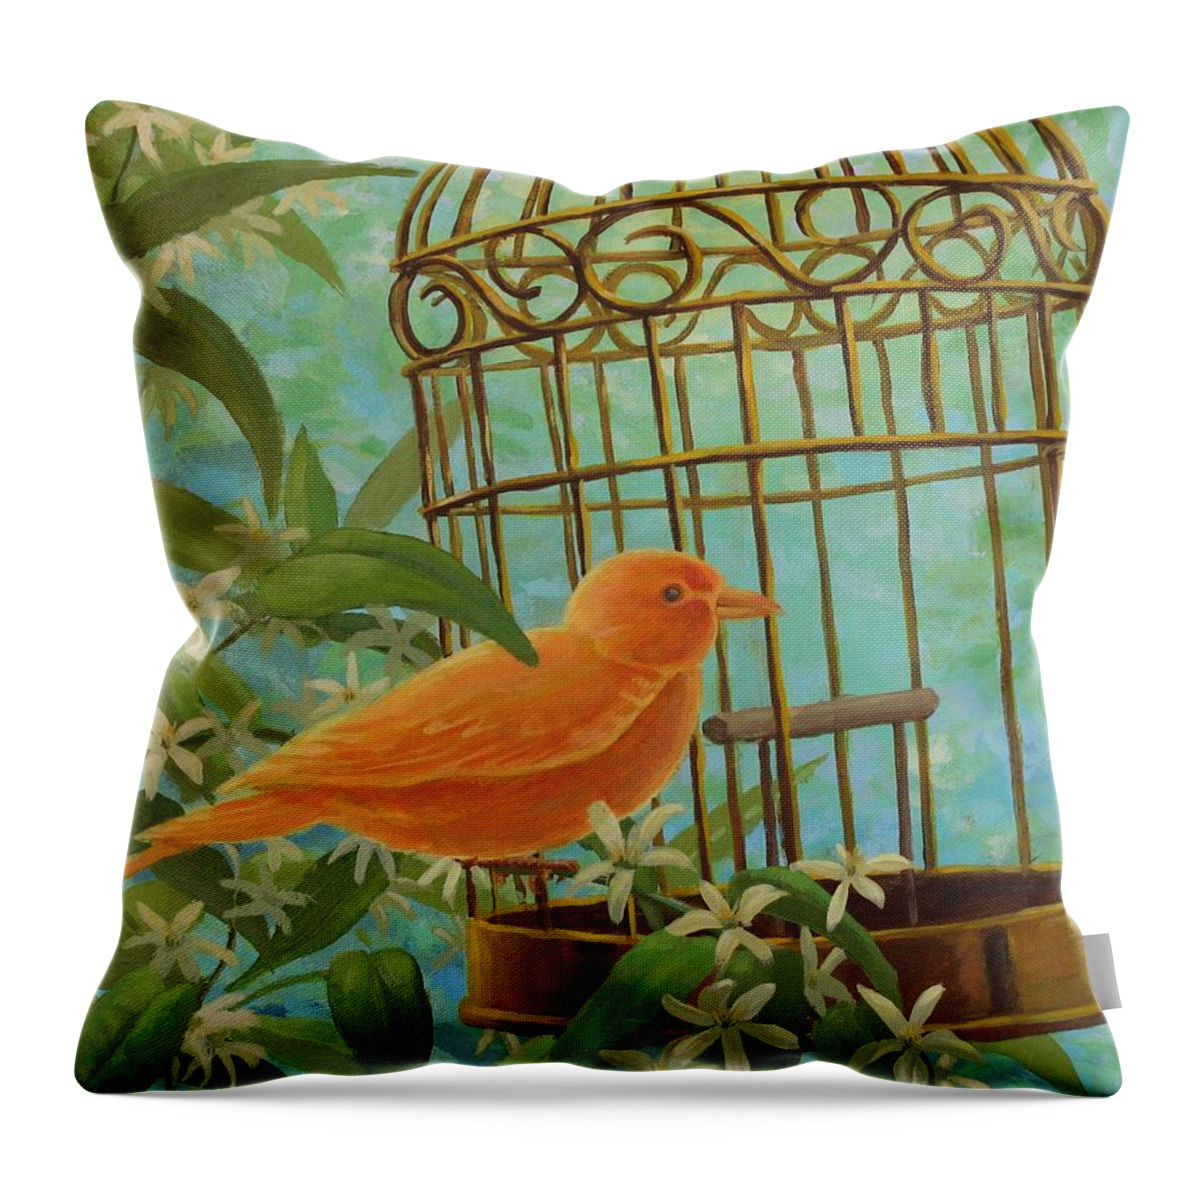 Canary Throw Pillow featuring the painting Dreamsicle by Don Morgan